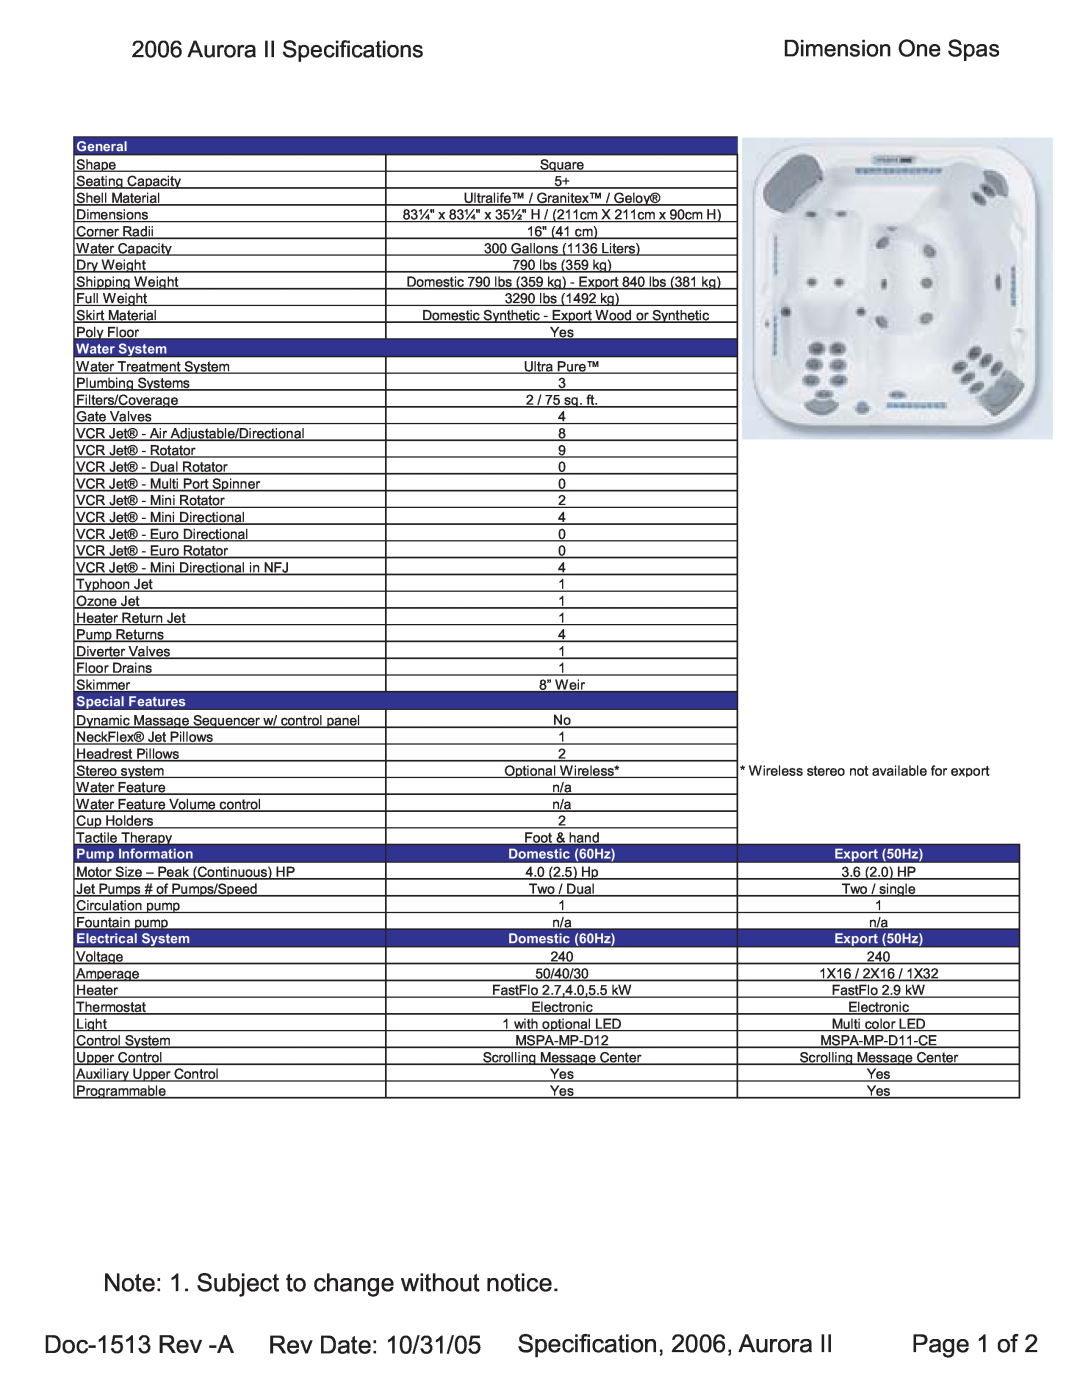 Dimension One Spas Aurora II specifications Note 1. Subject to change without notice, Page 1 of, General, Water System 